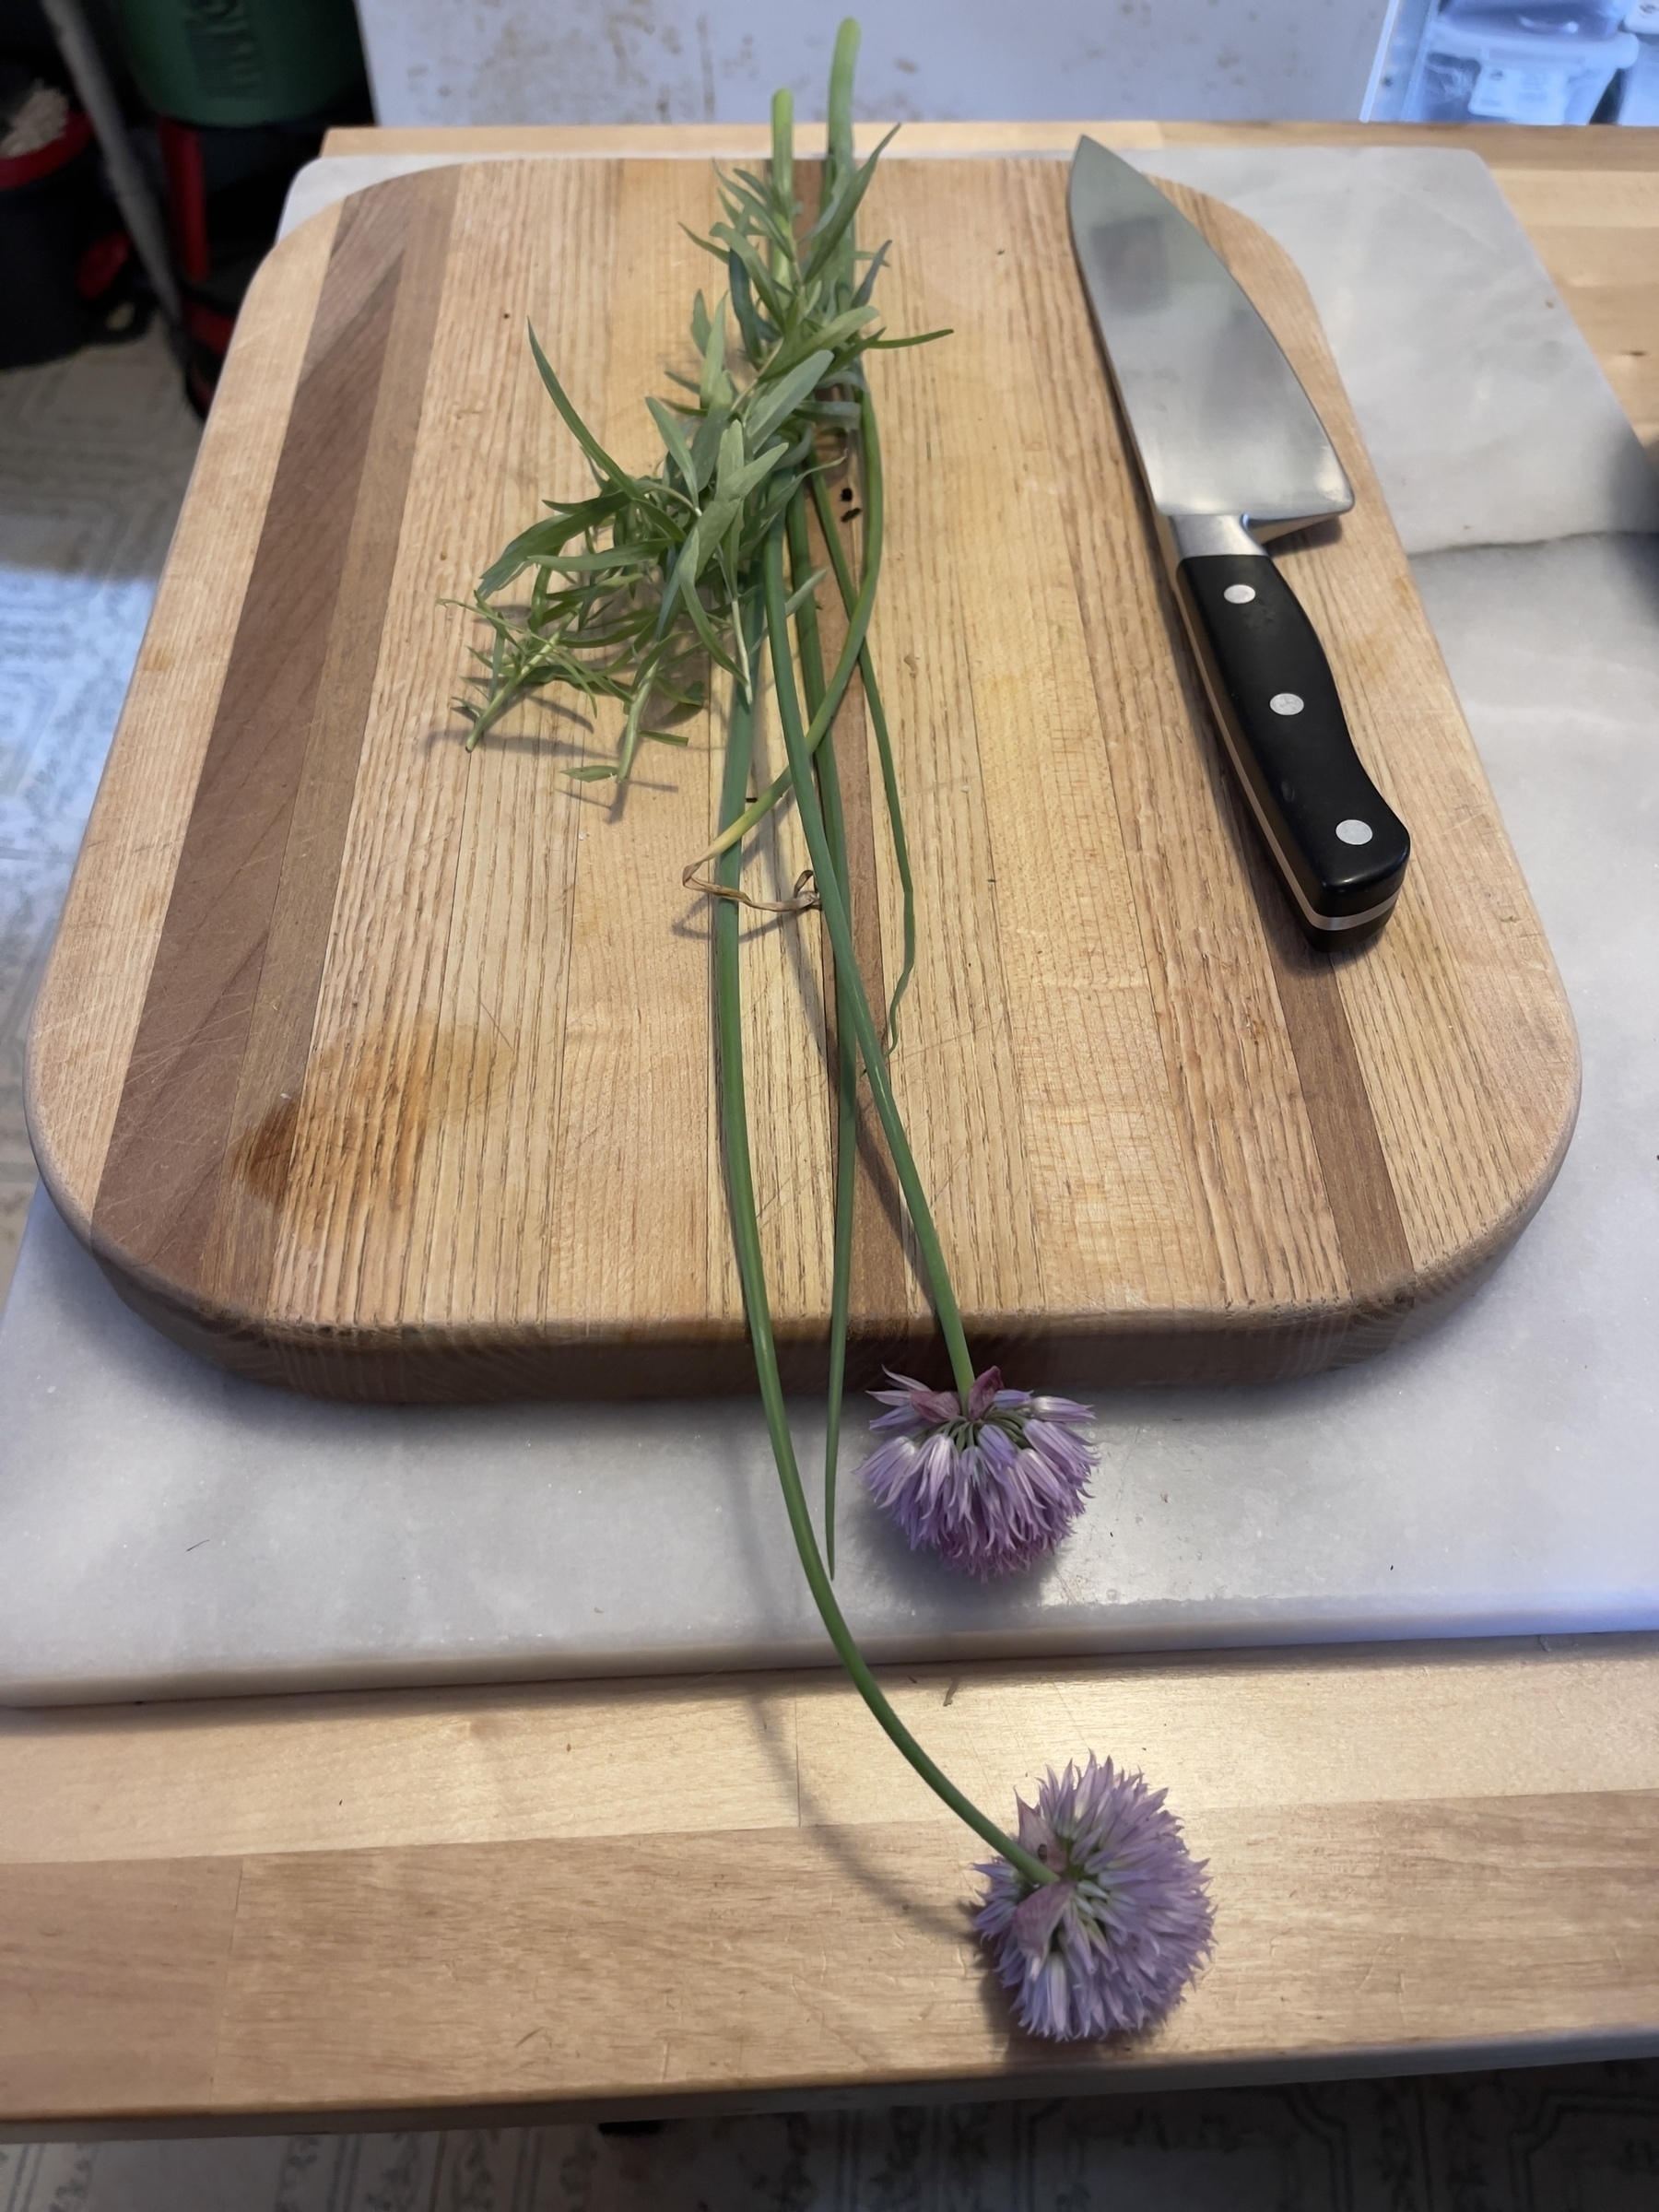 Tarragon and chive blossoms on a cutting board with knife.